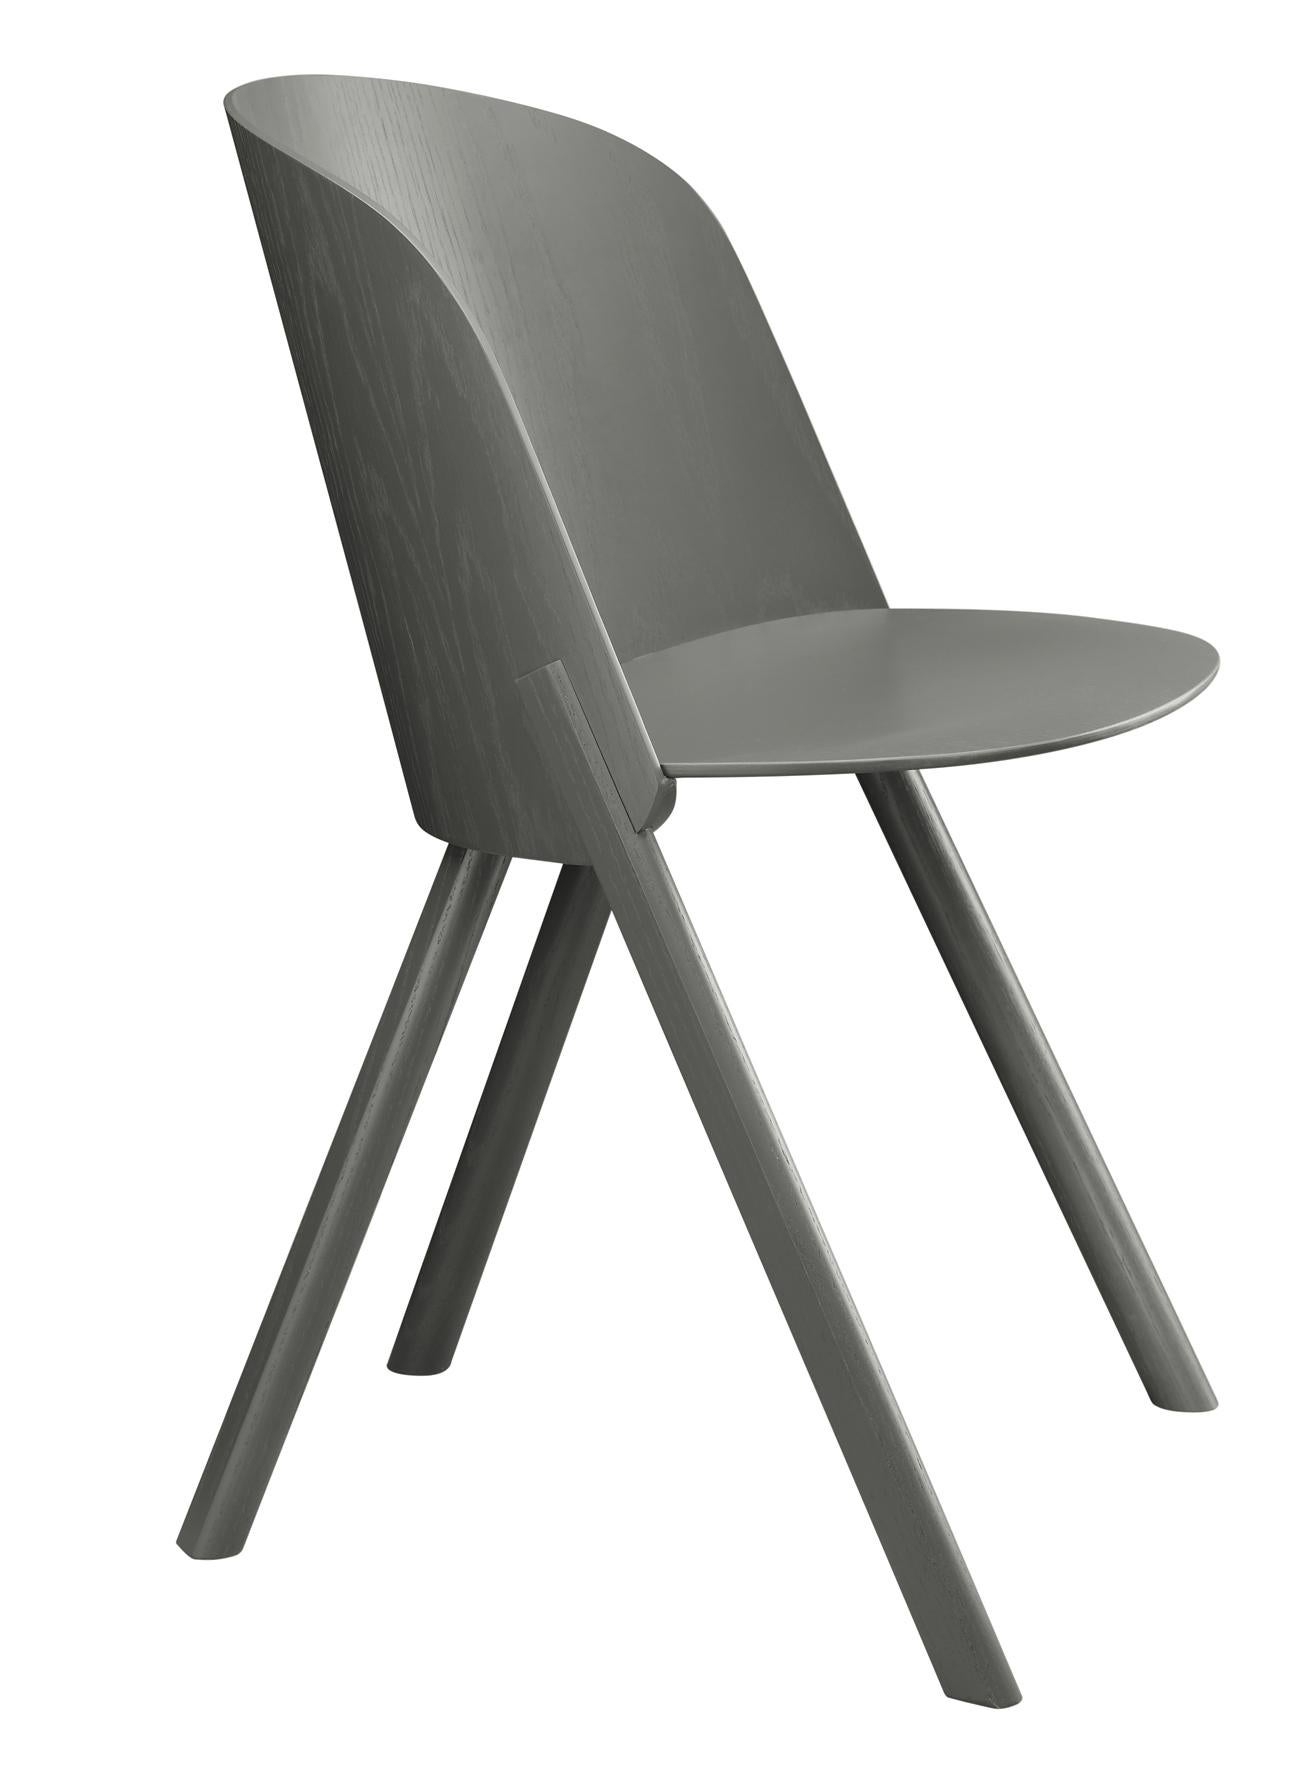 For Sale: Gray (Umbra Gray Lacquer) e15 This Side Chair by Stefan Diez